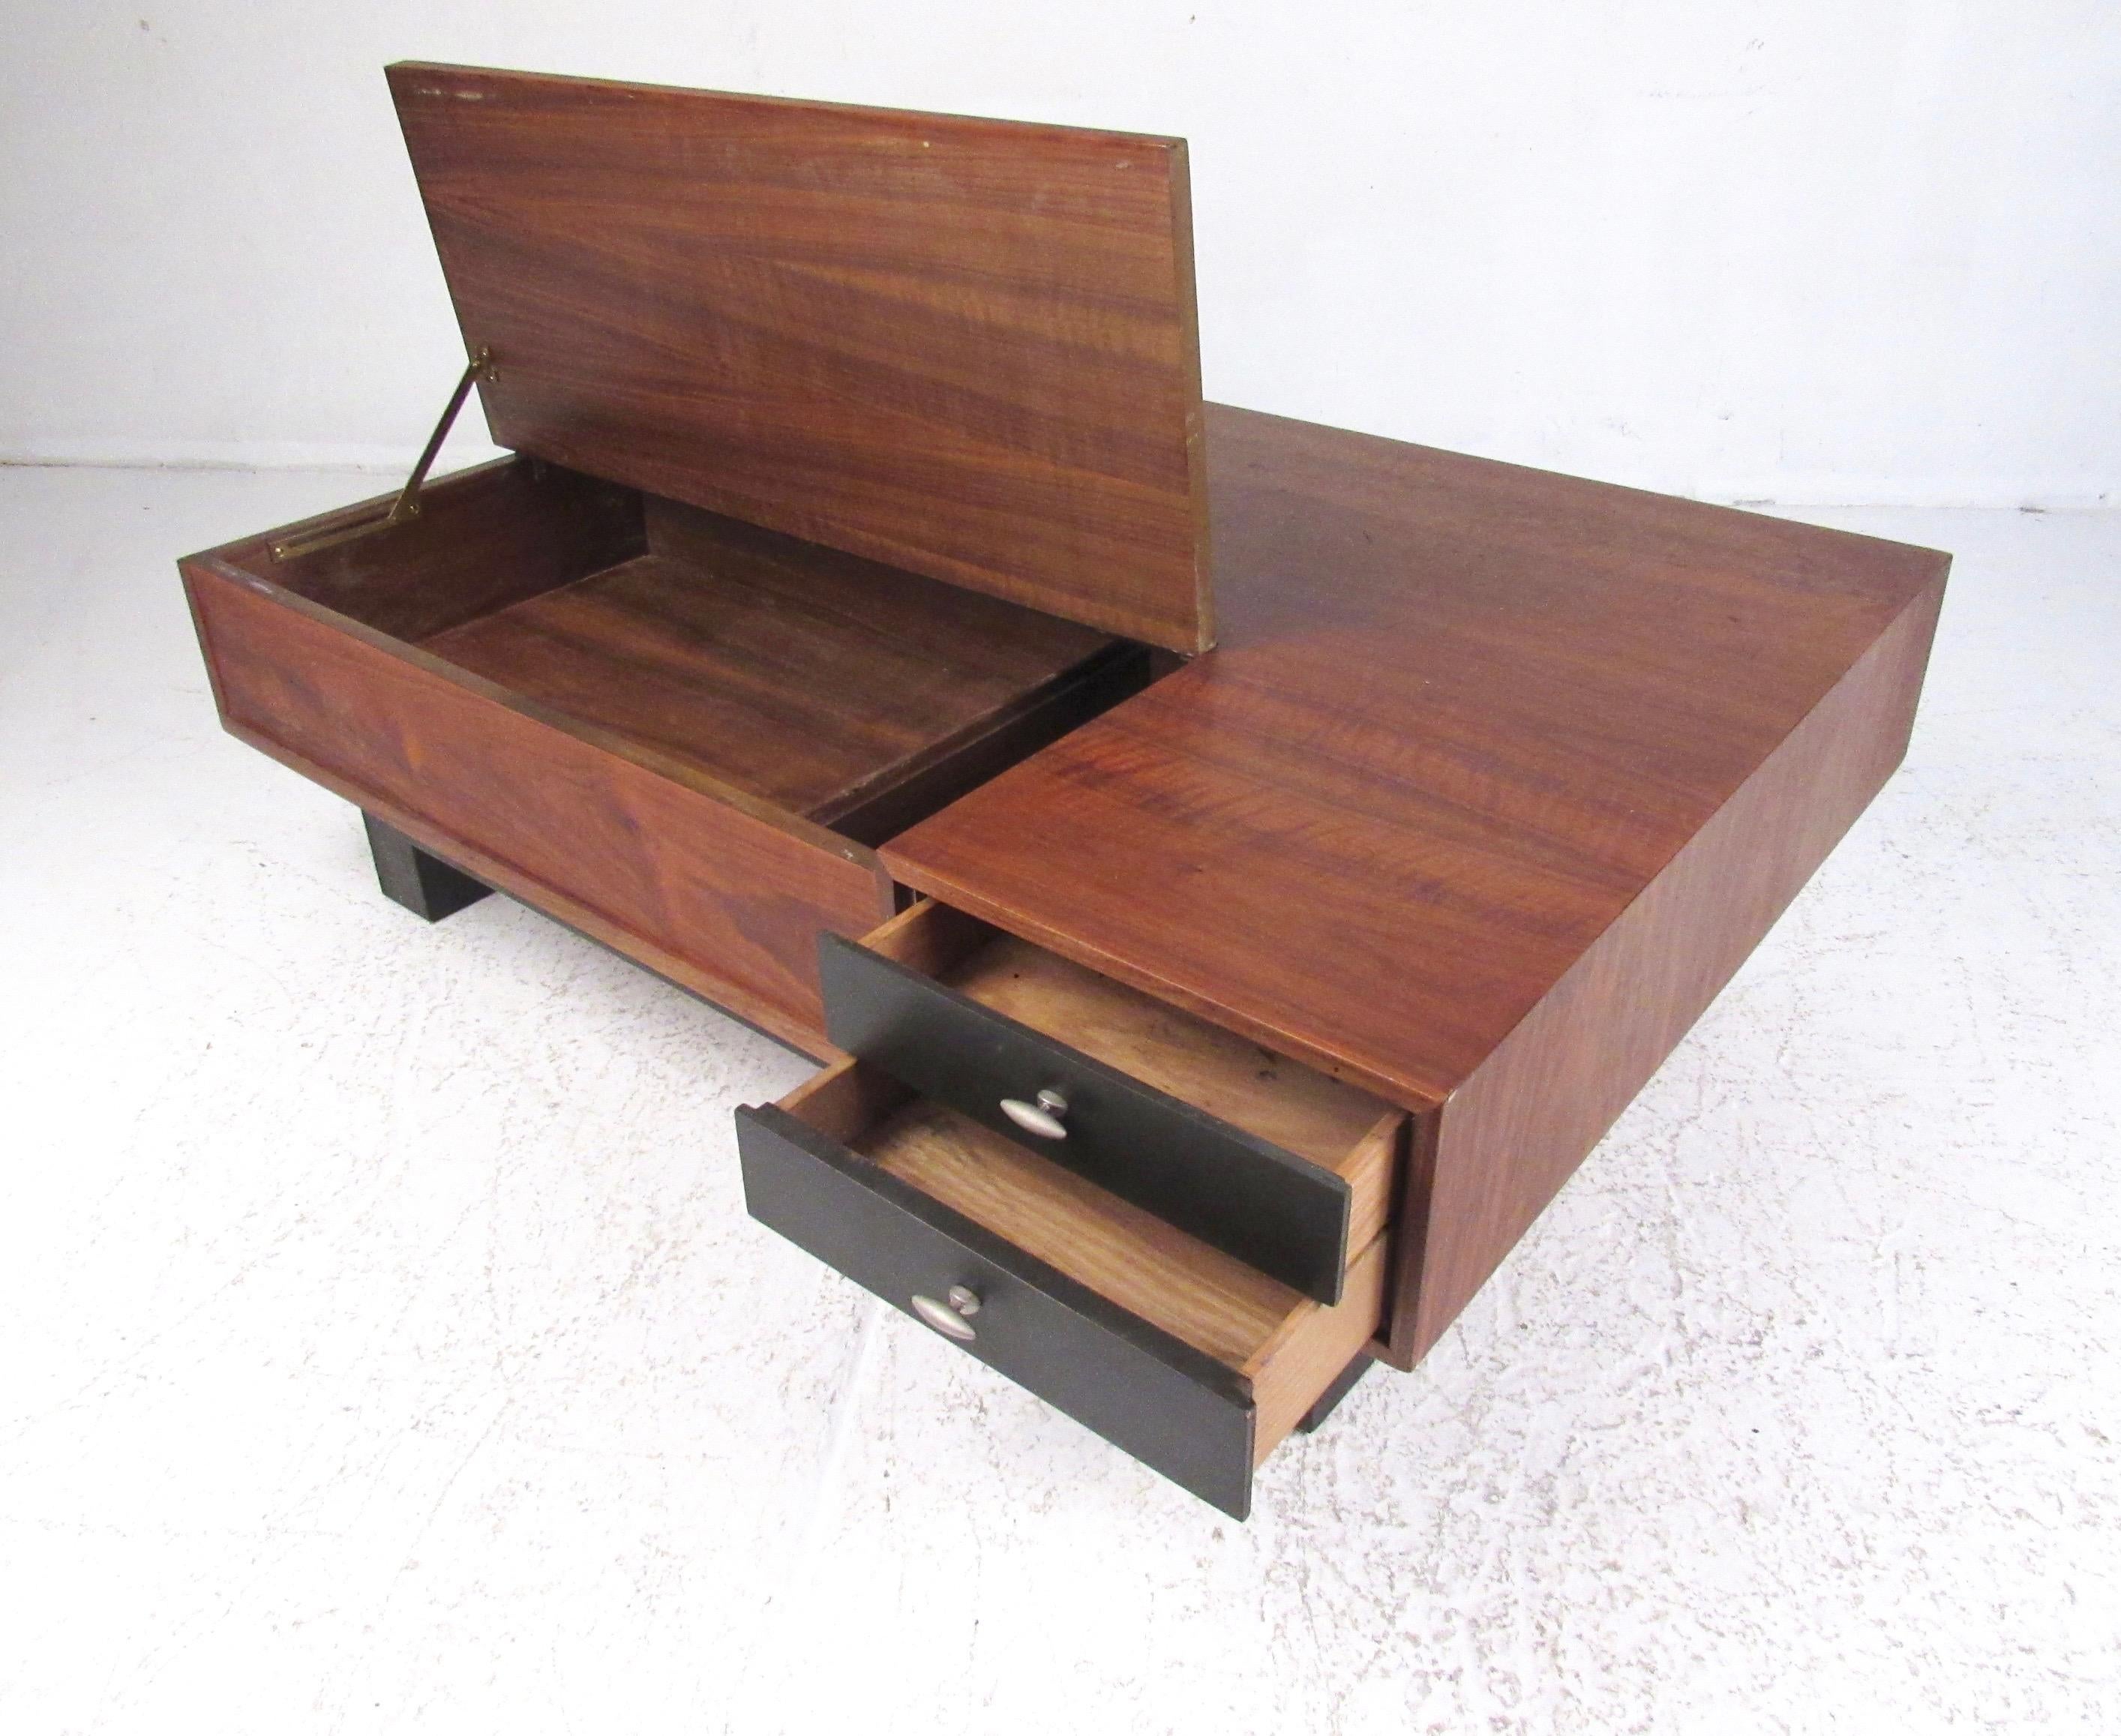 This impressive vintage modern coffee table by Drexel furniture features beautiful walnut finish, ebonized hardwood sides, and unique drawer pulls. Two in one storage options include a pair of matching drawers and a lift top interior cabinet,